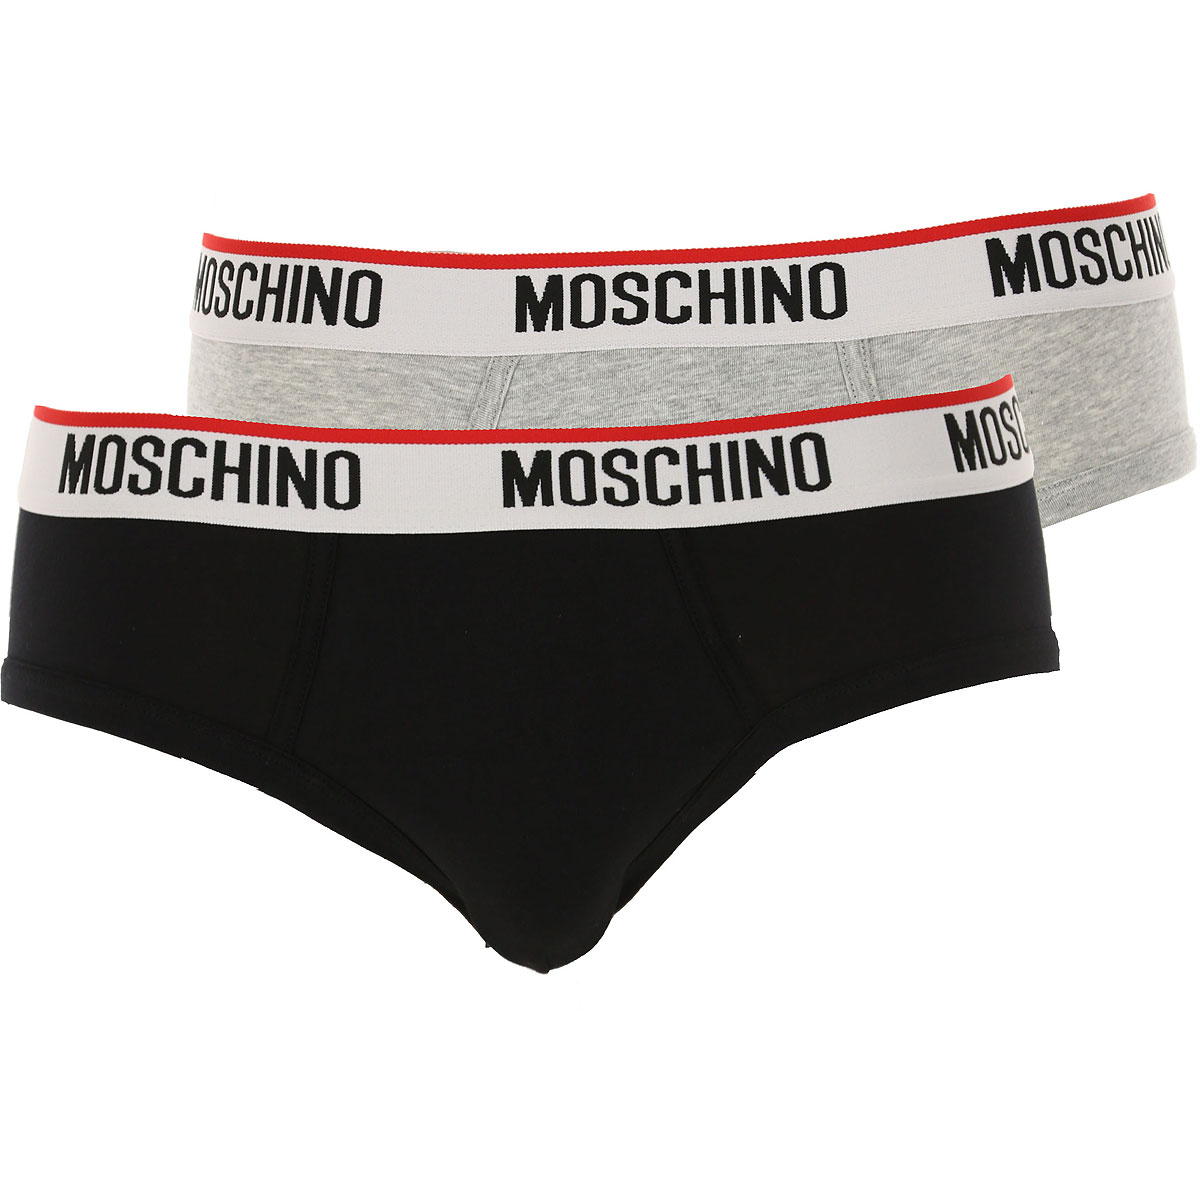 Mens Underwear Moschino, Style code: cont-a4703-5670